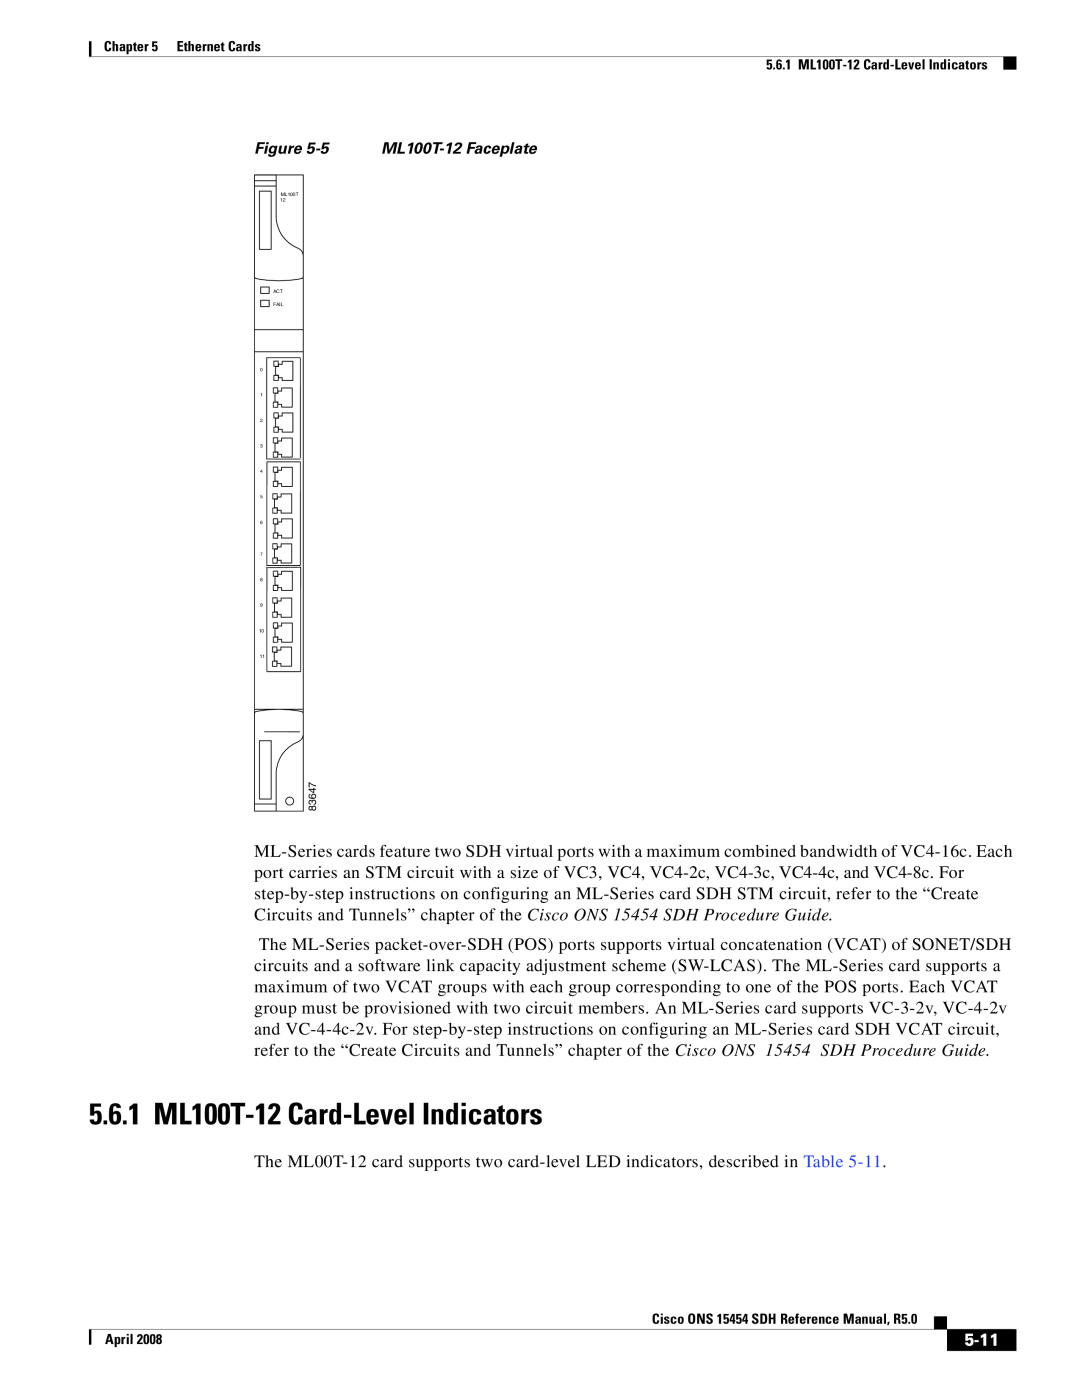 Cisco Systems ONS 15454 SDH specifications 5.6.1 ML100T-12 Card-LevelIndicators, 5-11, 5 ML100T-12Faceplate 